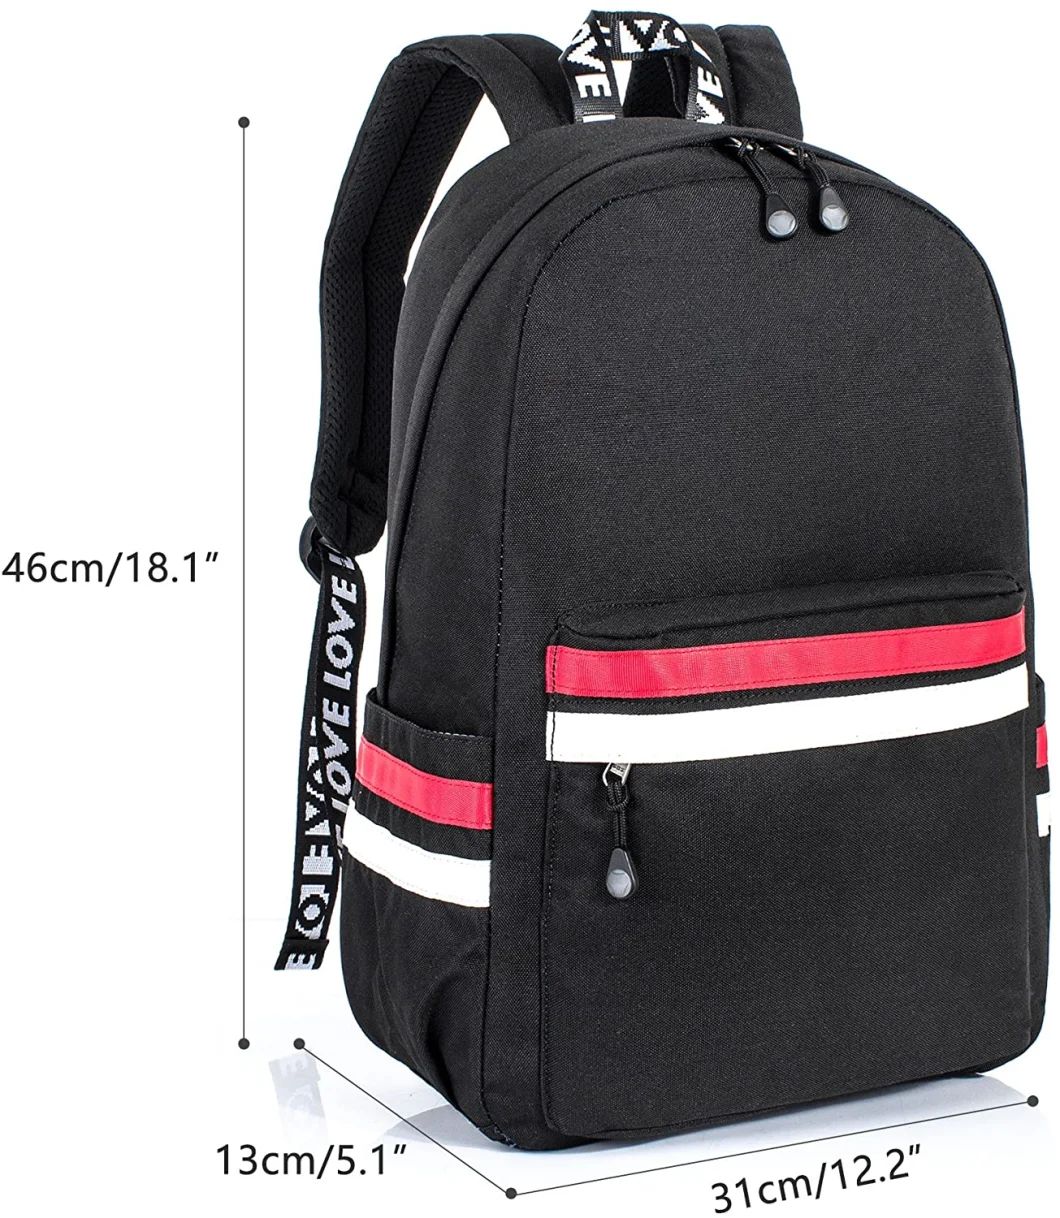 Fashion Laptop Backpack 15.6 Inch Water Resistant Causal Daypack Bag for School Travel Work Red